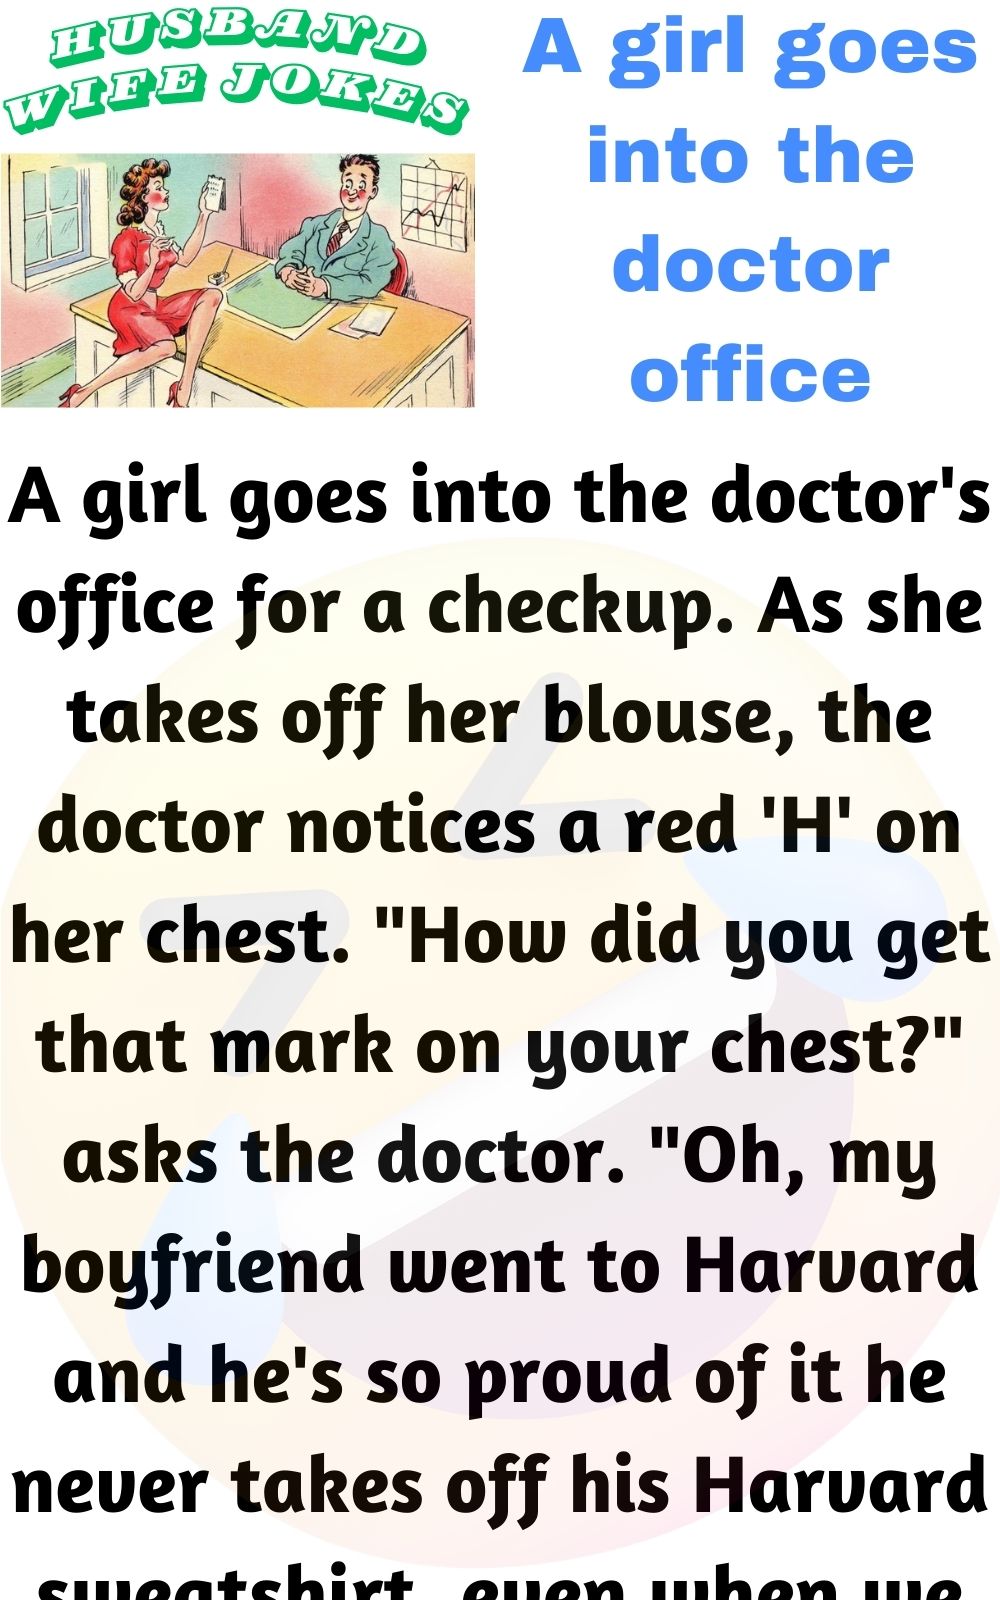 A girl goes into the doctor office